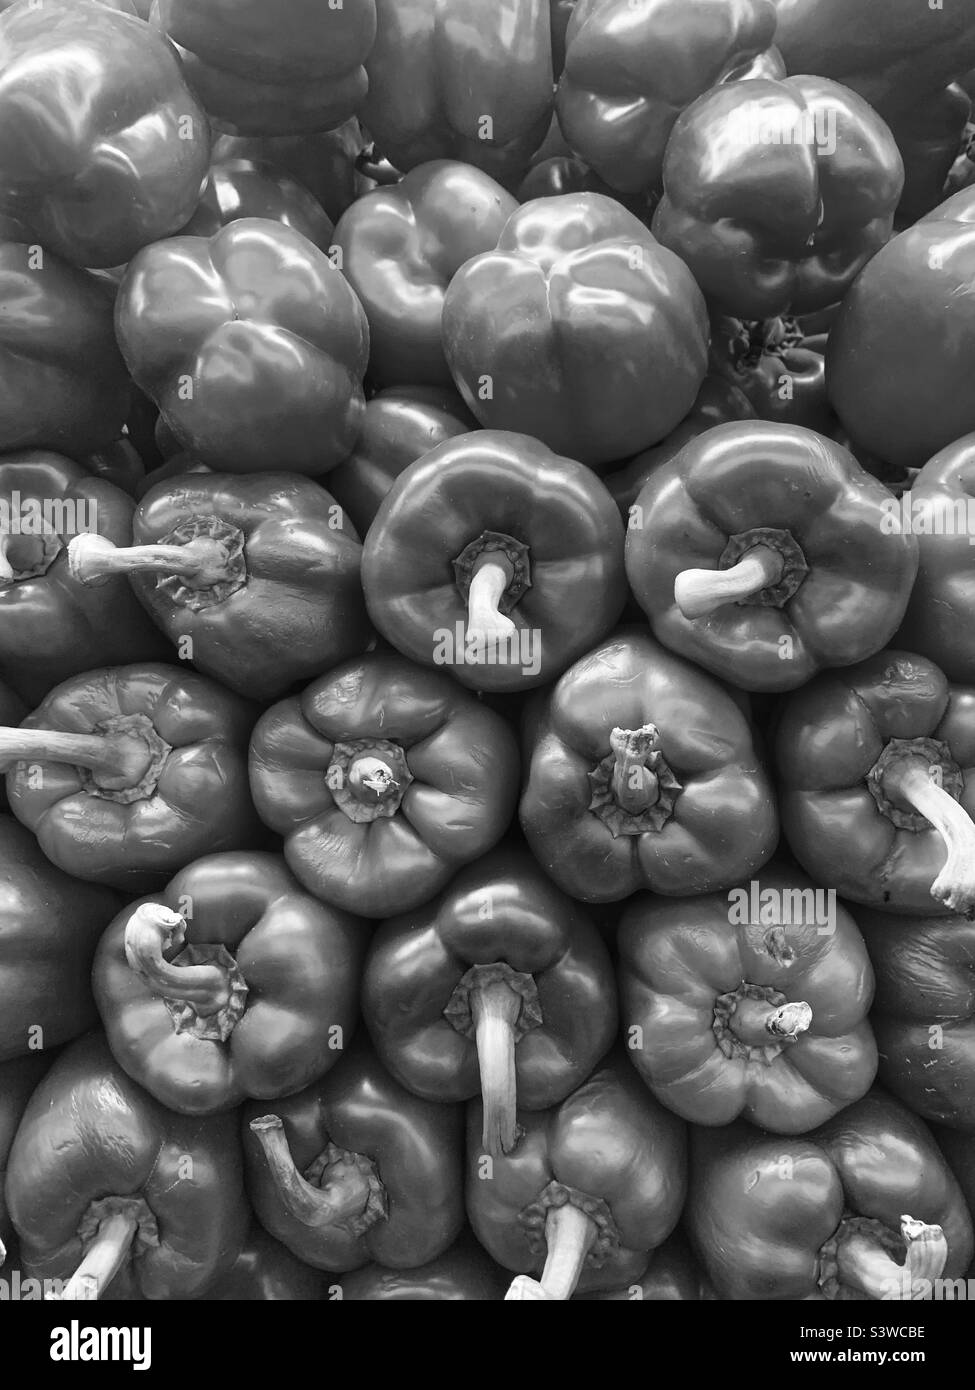 Beautiful fresh bell peppers piled high in the produce section in black and white. Stock Photo